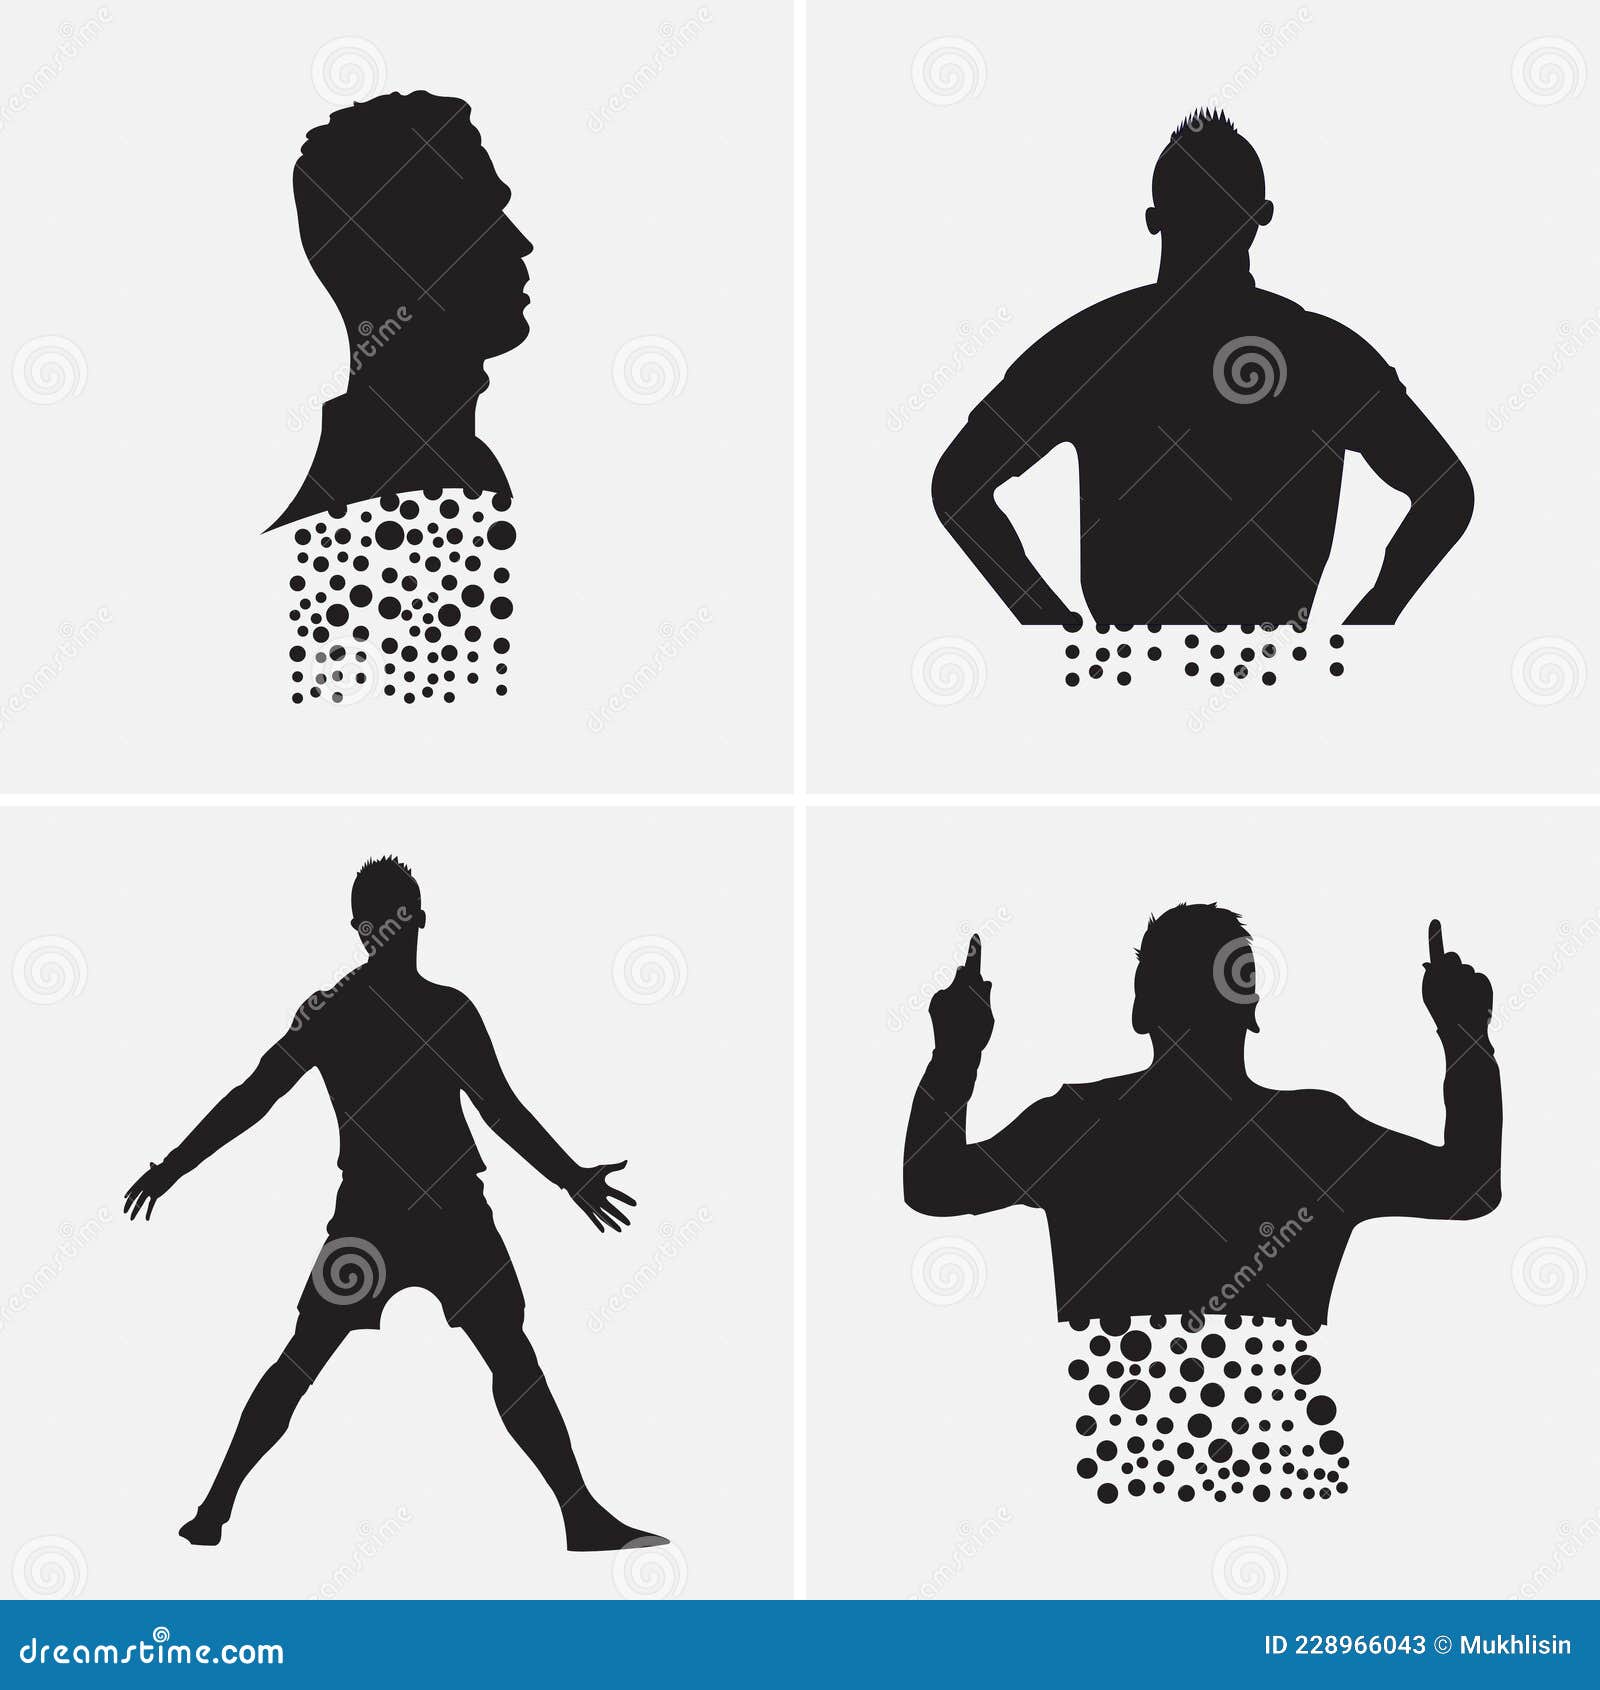 cristiano ronaldo  silhouette black edition, the  can be used for, magazine, news, web, collection, and etc